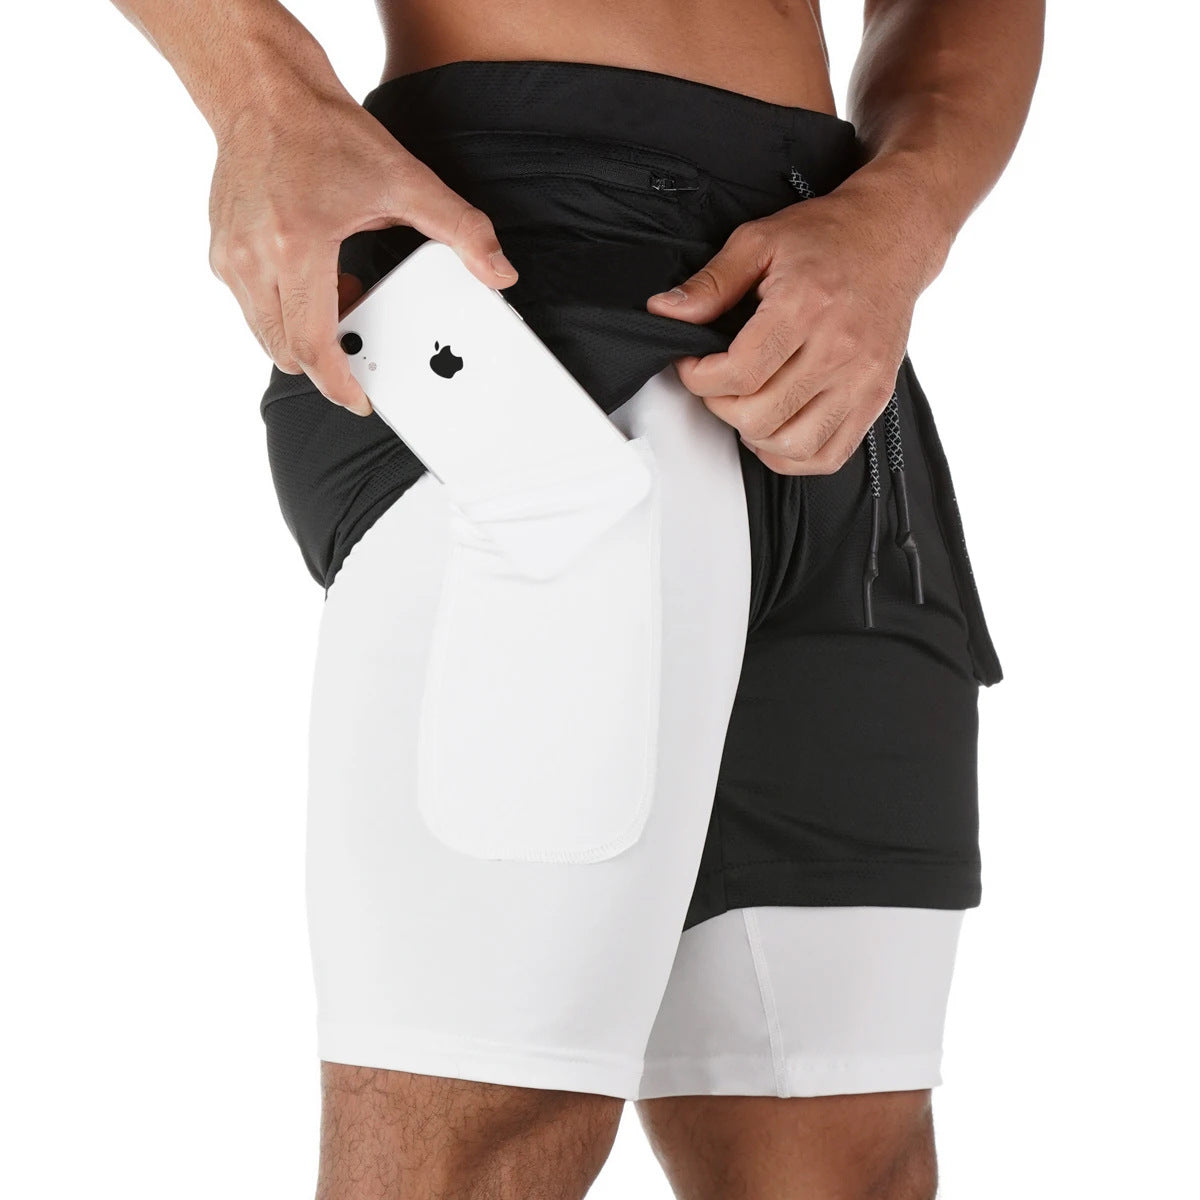 Double-Gloss Camo Sports Shorts with Inner Bladder